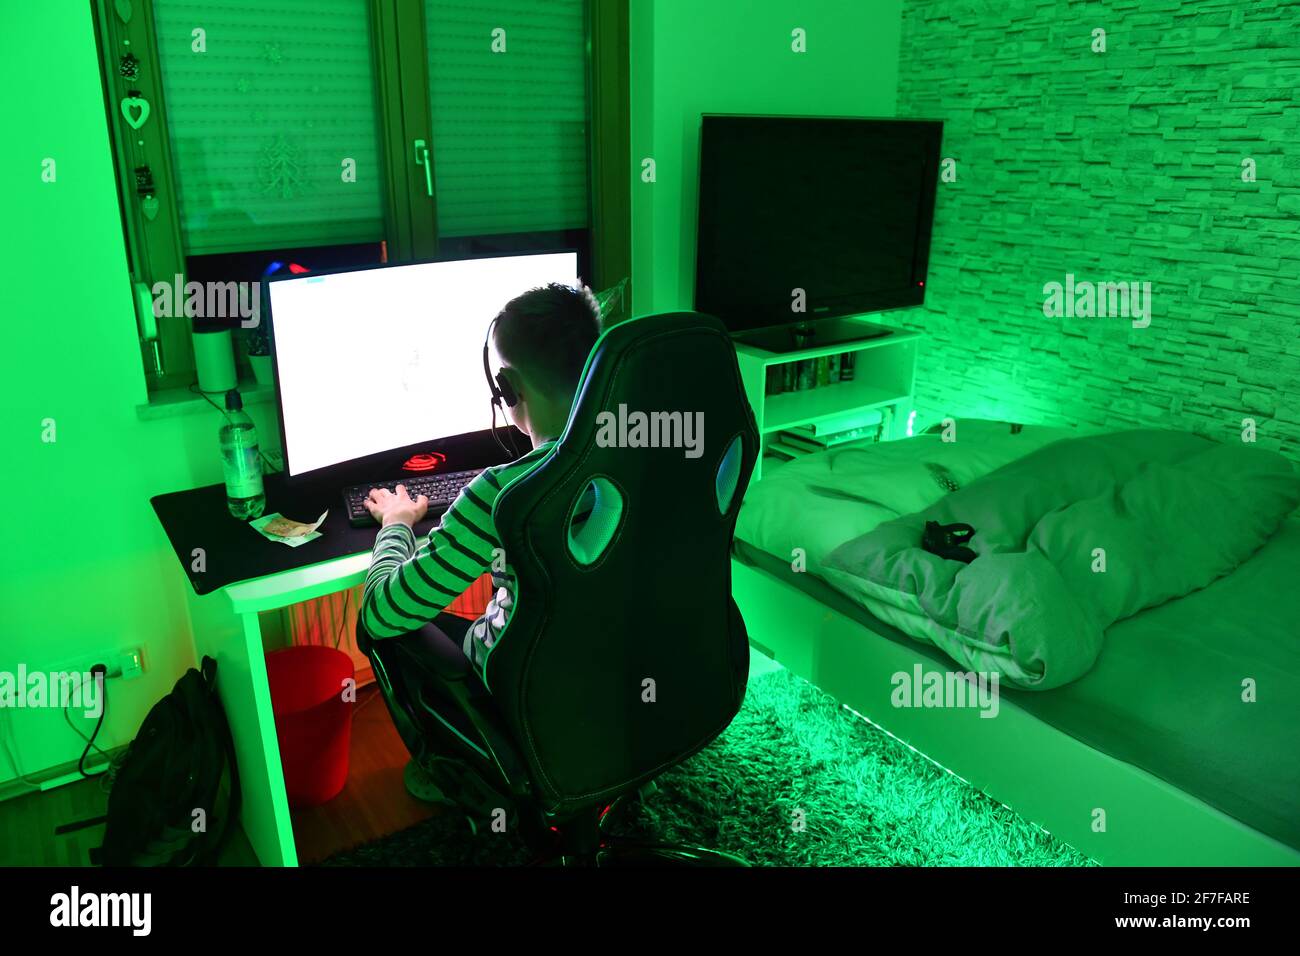 Page 4 - Gaming Pc High Resolution Stock Photography and Images - Alamy